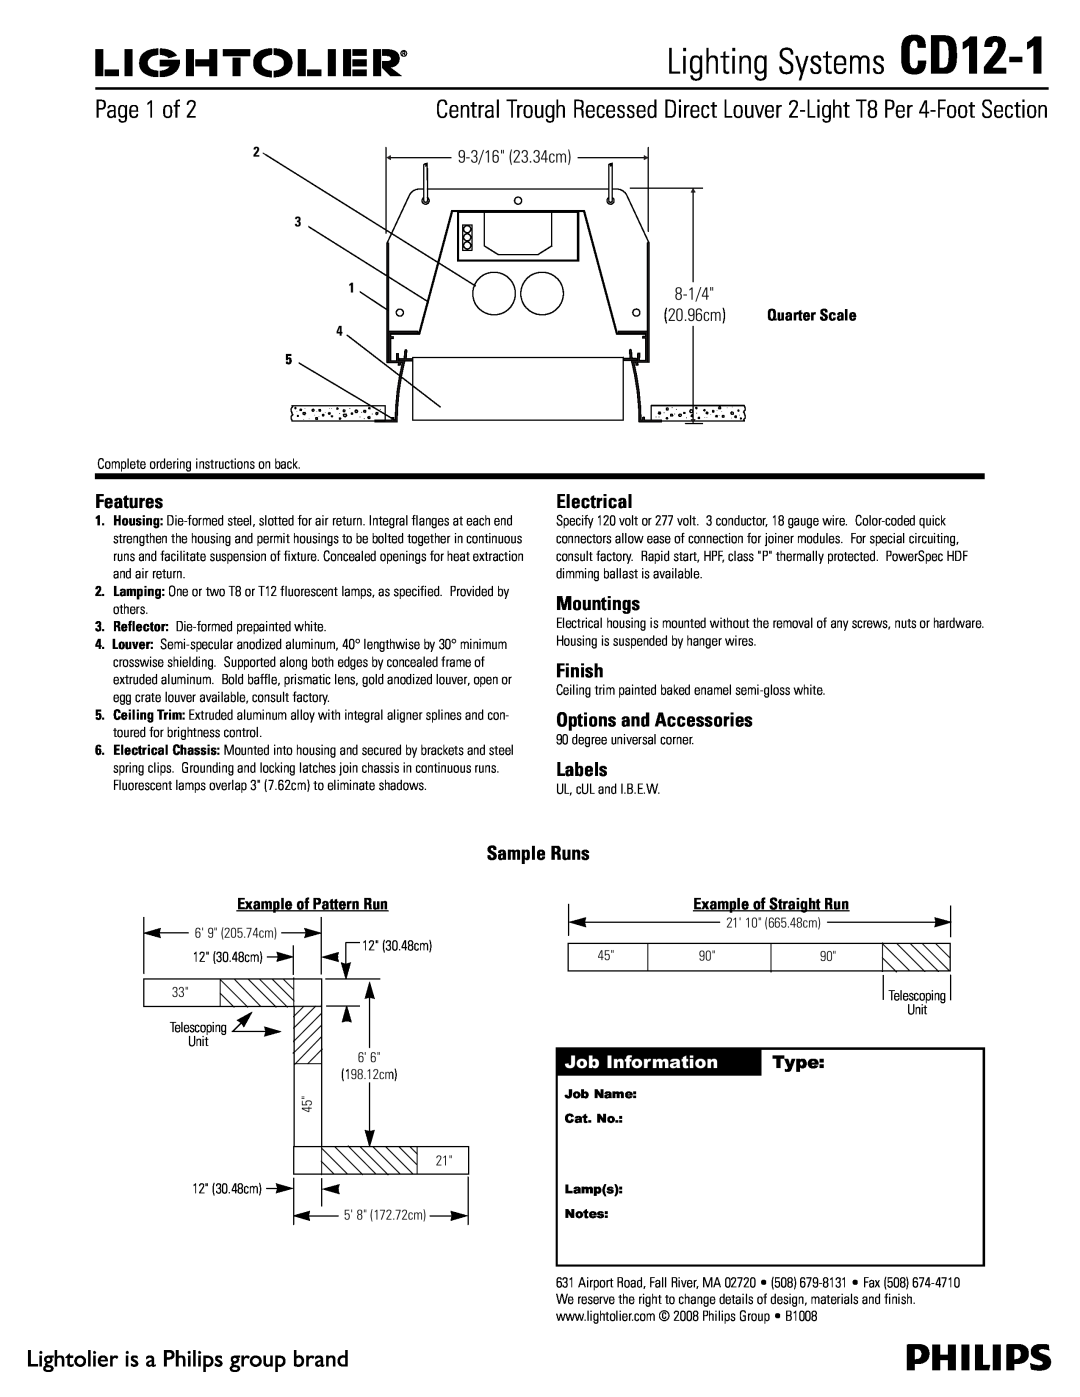 Lightolier CD12-1 manual Features, Electrical, Mountings, Finish, Options and Accessories, Labels, Sample Runs, 20.96cm 